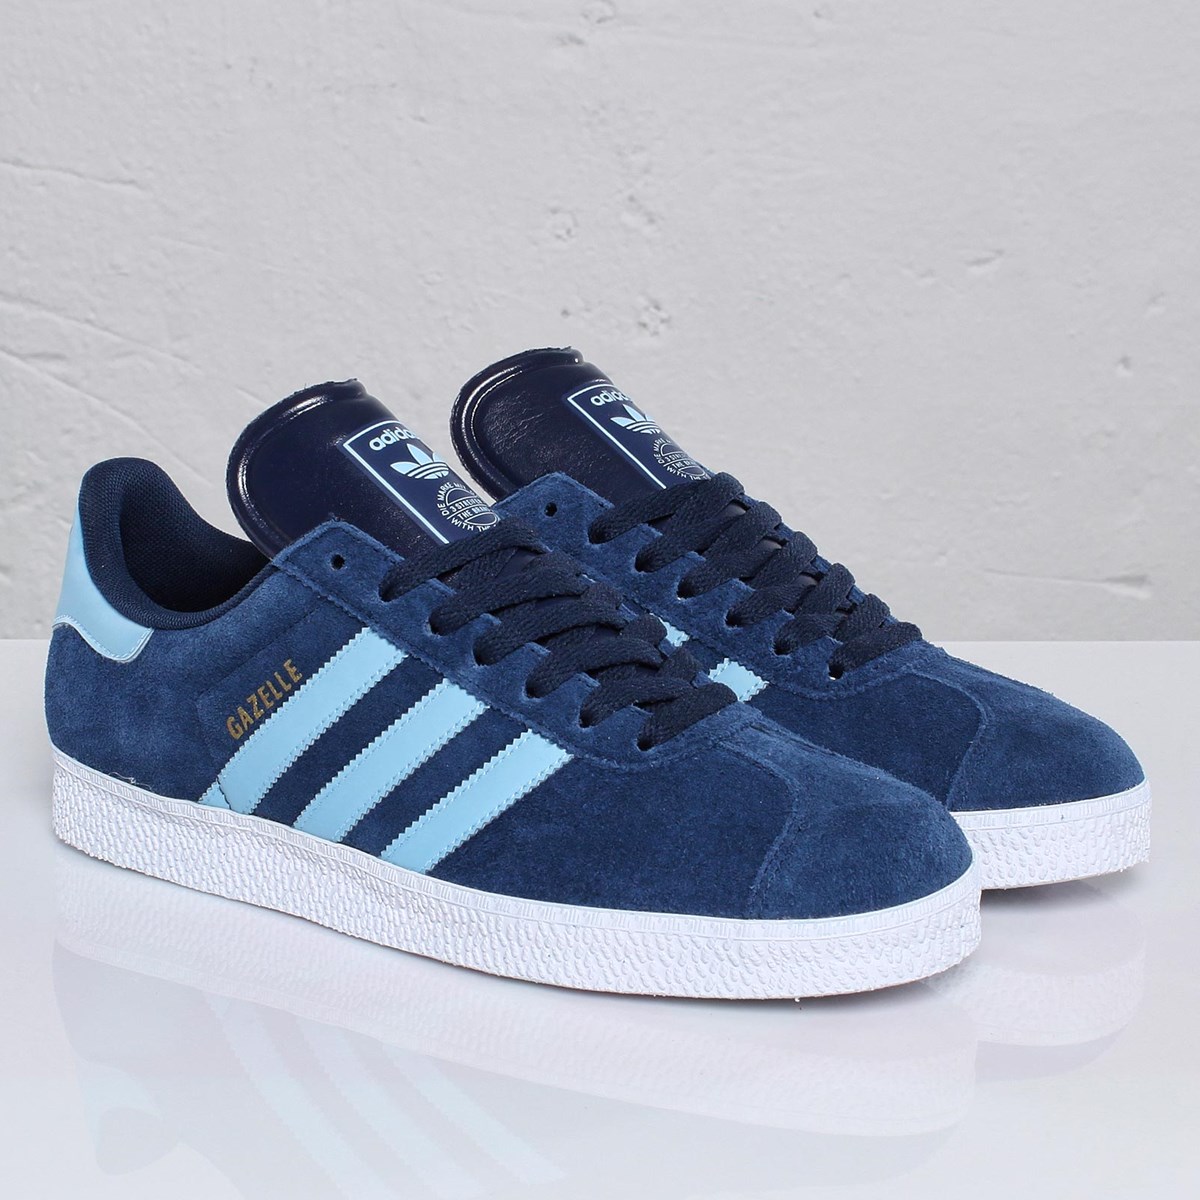 samenzwering Af en toe Kwaadaardig priscilla page on Twitter: "thinking about Skyfall and how I've wanted  these Adidas Gazelle 2 sneakers (in dark indigo with Argentina blue stripes)  forever that Bond briefly wears in the film. never